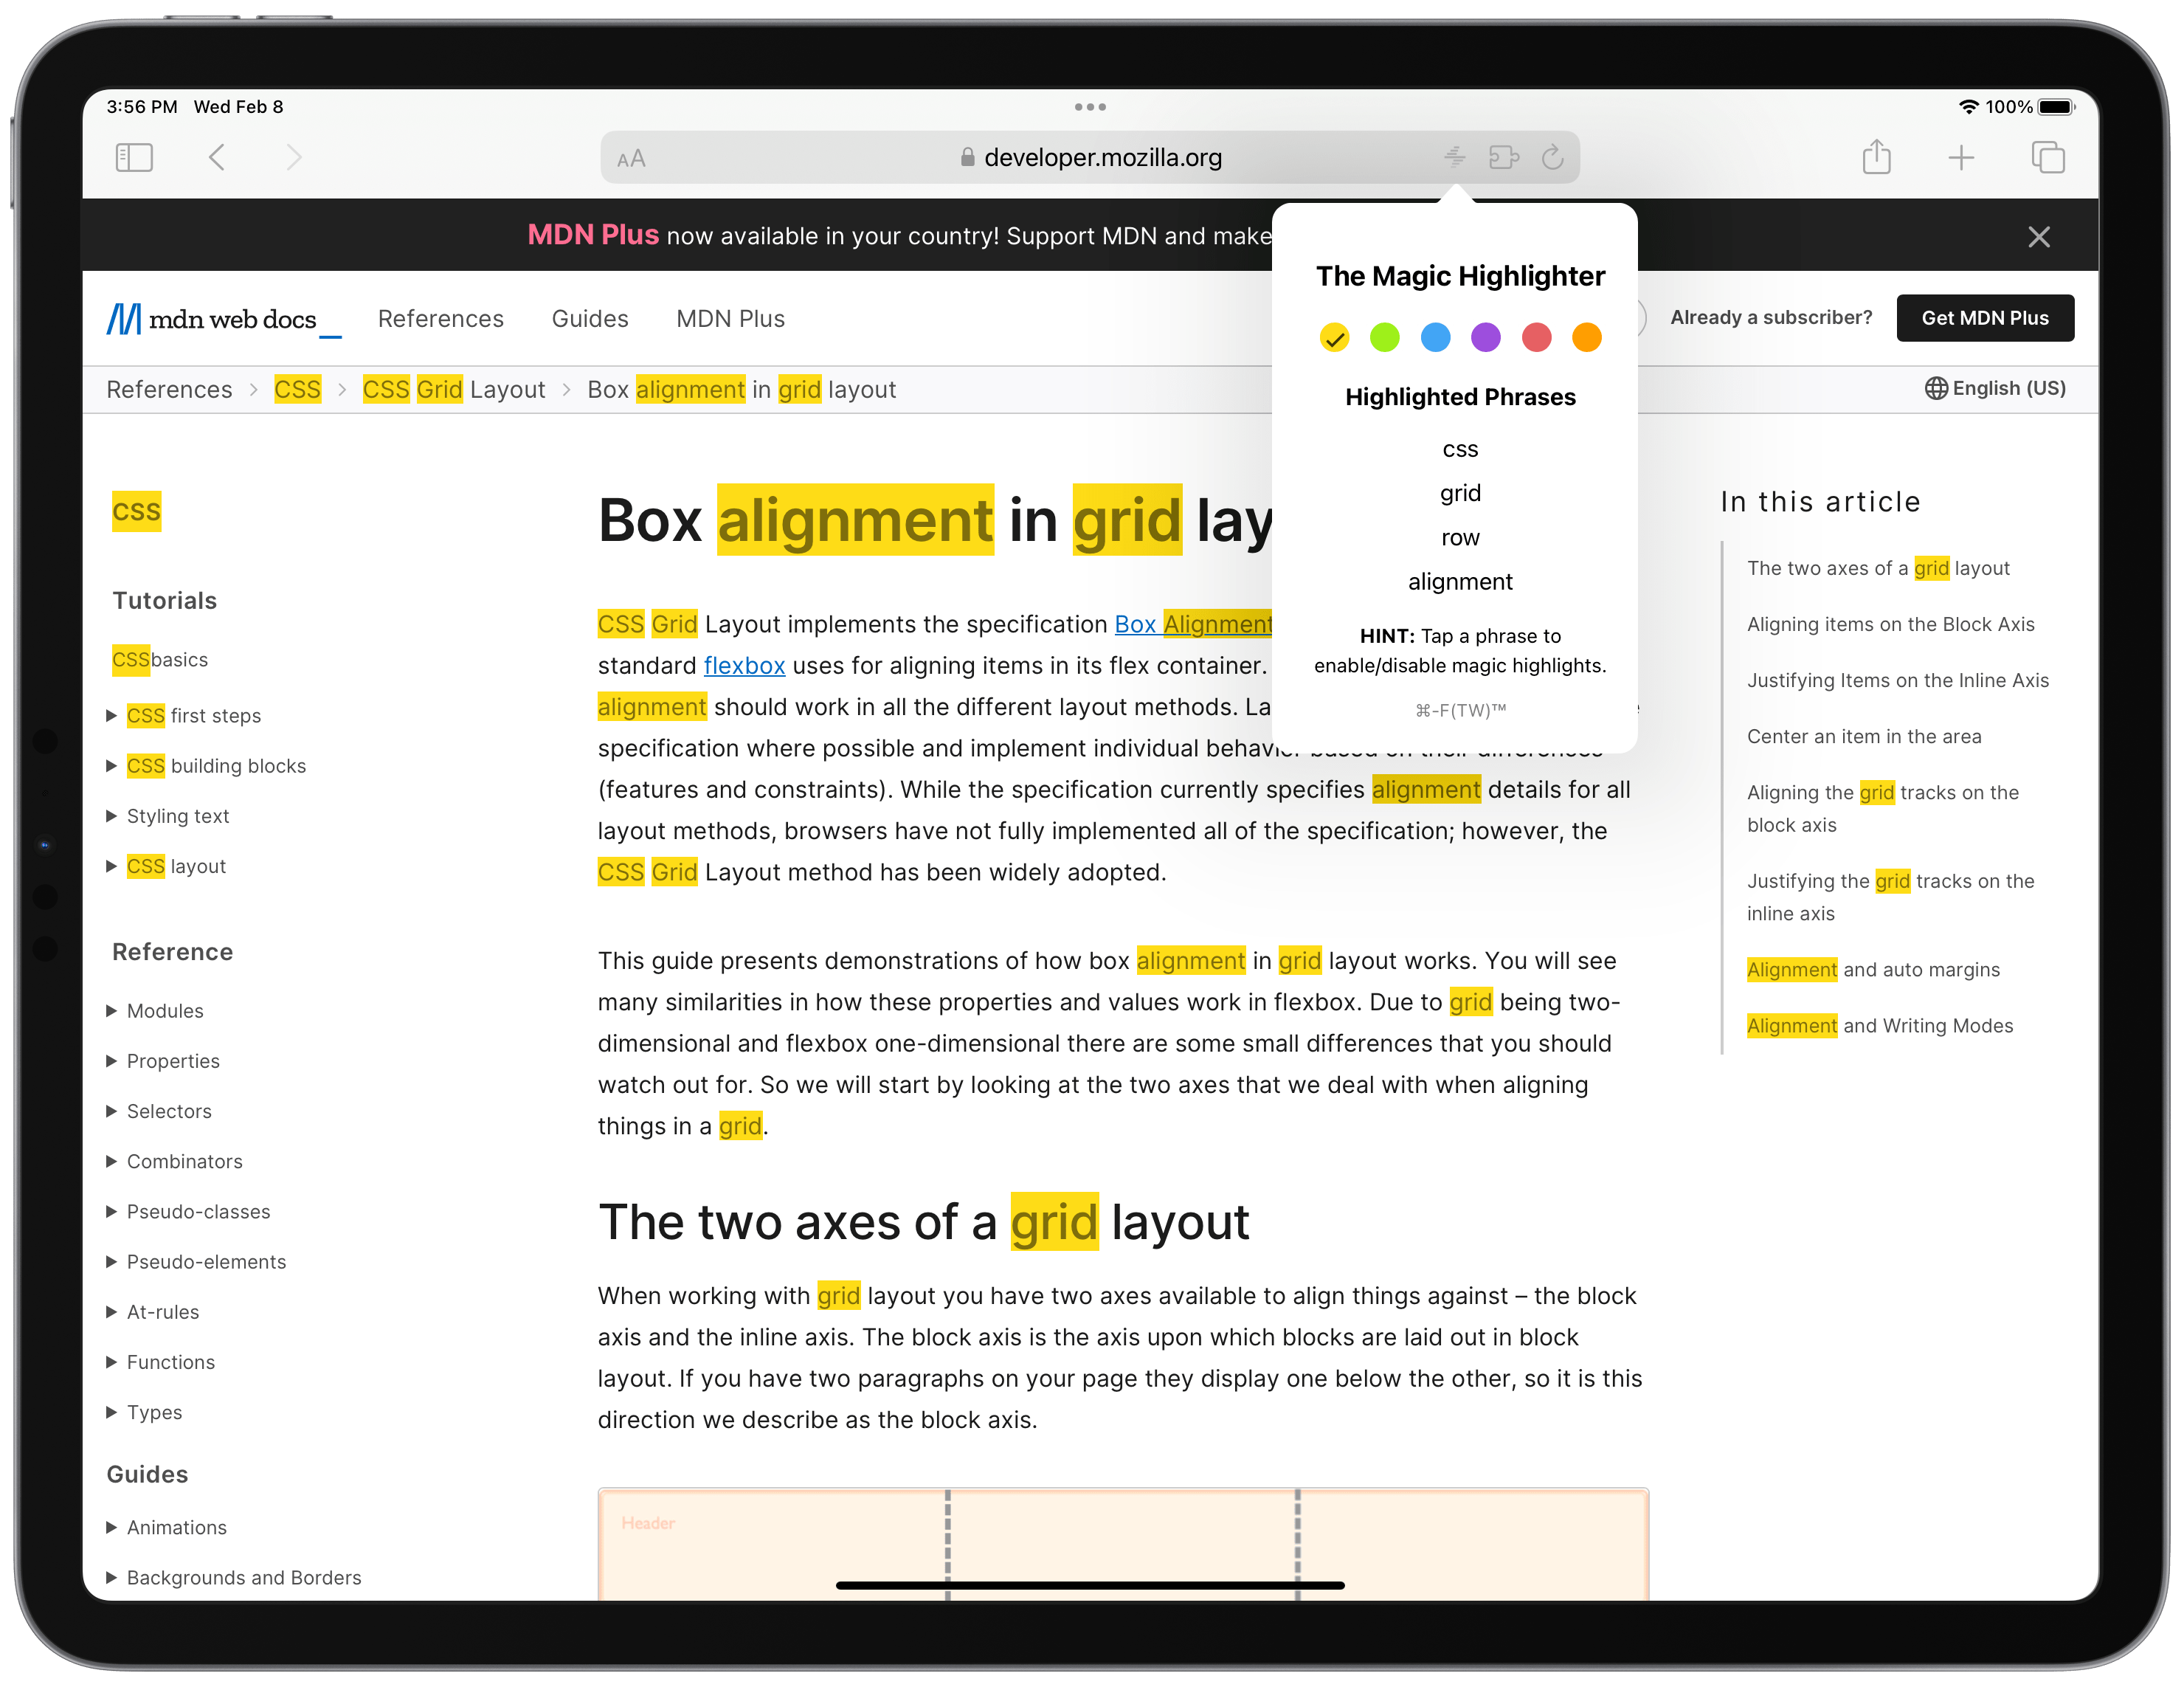 The Magic Highlighter helps you find the words you're looking for on webpages